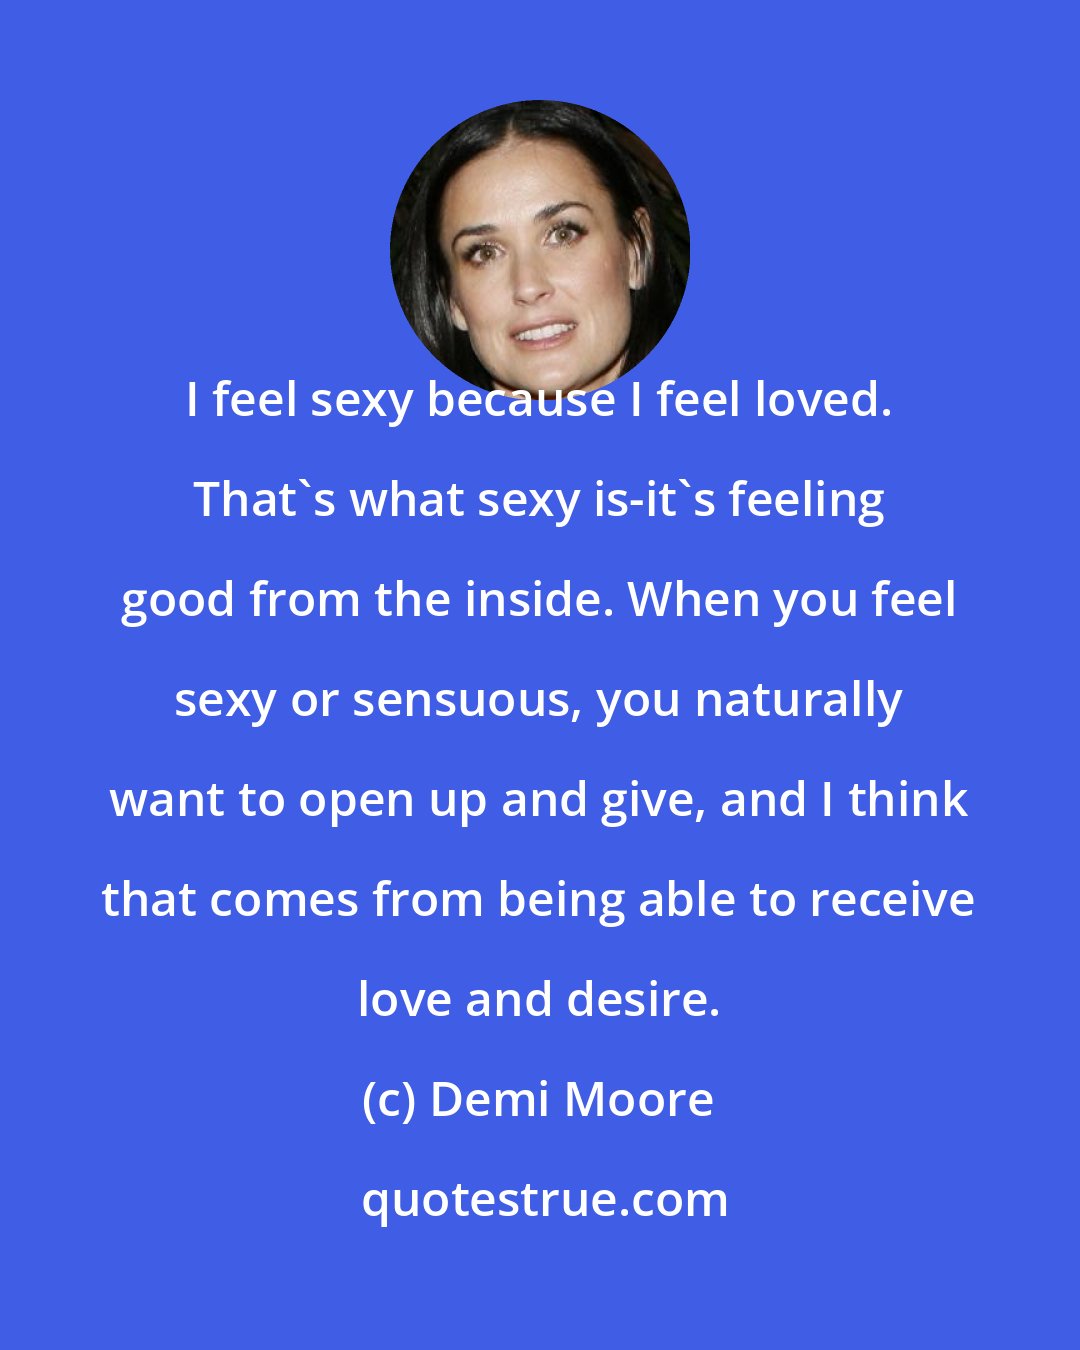 Demi Moore: I feel sexy because I feel loved. That's what sexy is-it's feeling good from the inside. When you feel sexy or sensuous, you naturally want to open up and give, and I think that comes from being able to receive love and desire.